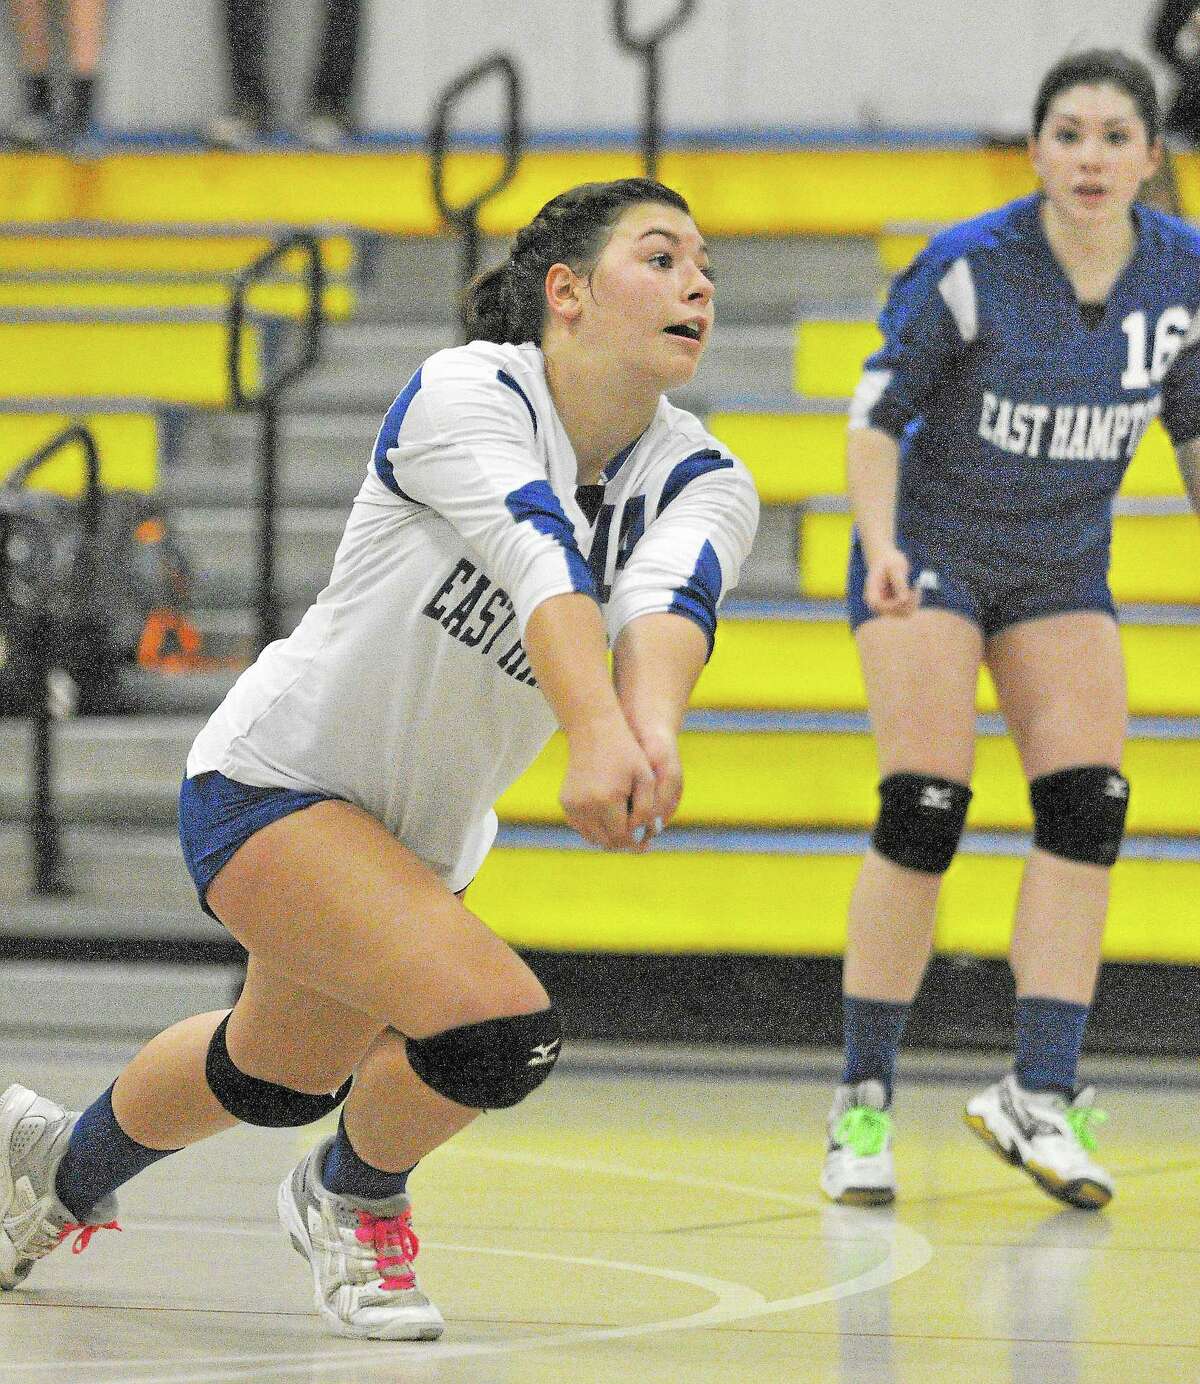 Catherine Avalone — The Middletown Press East Hampton’s Grace Fales gets ready to bump the ball against Haddam-Killingworth in a Shoreline Semifinal game Thursday afternoon in Higganum. East Hampton won 3-1.